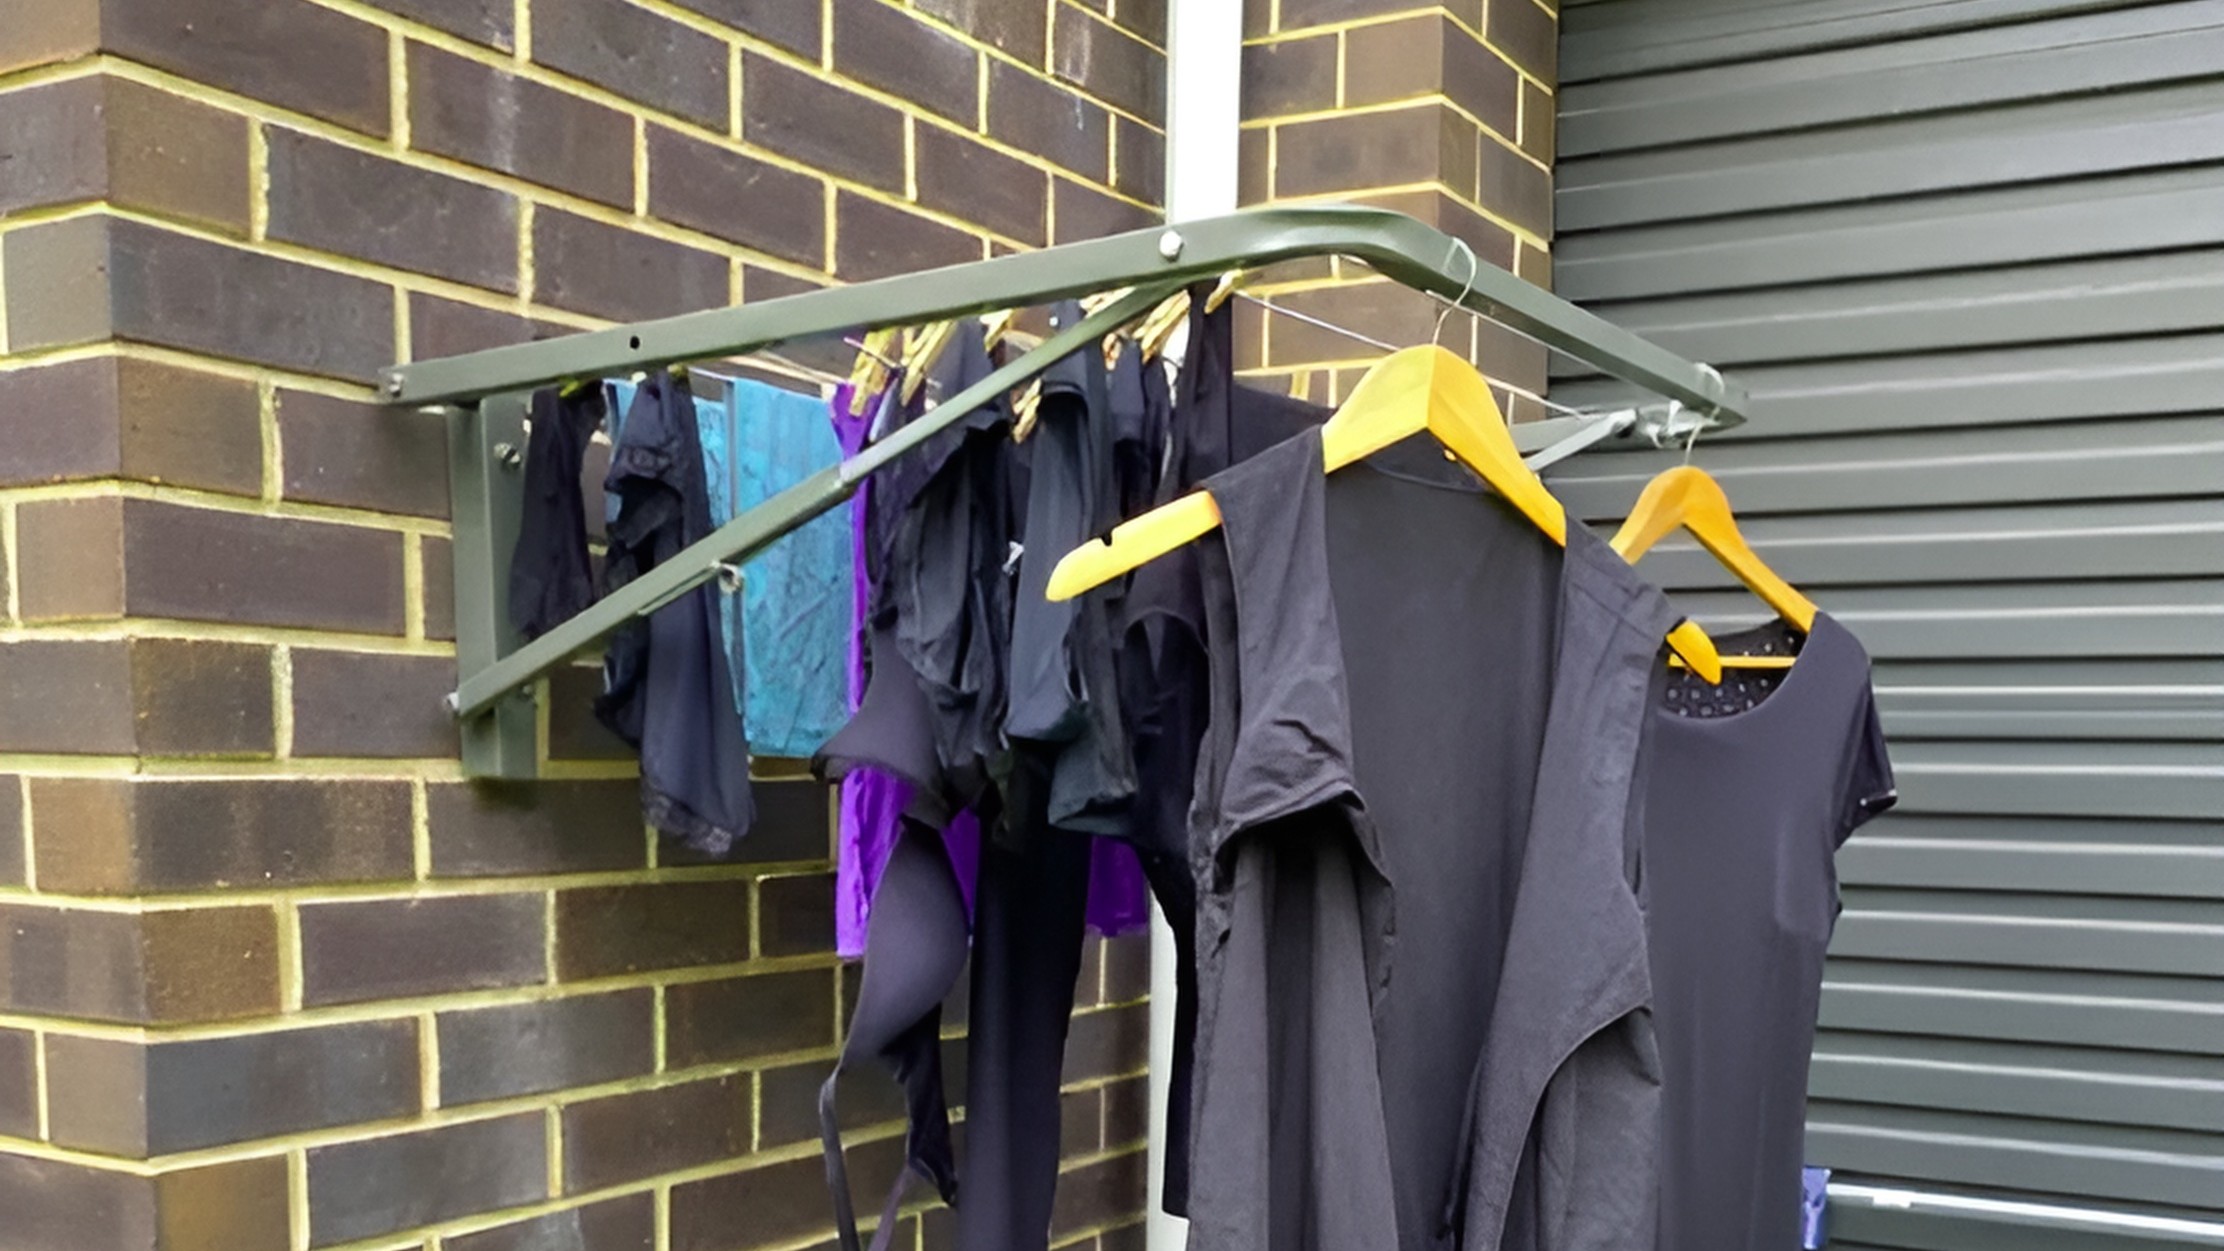 Clothesline Ideas for Small Spaces Utilising Vertical Space